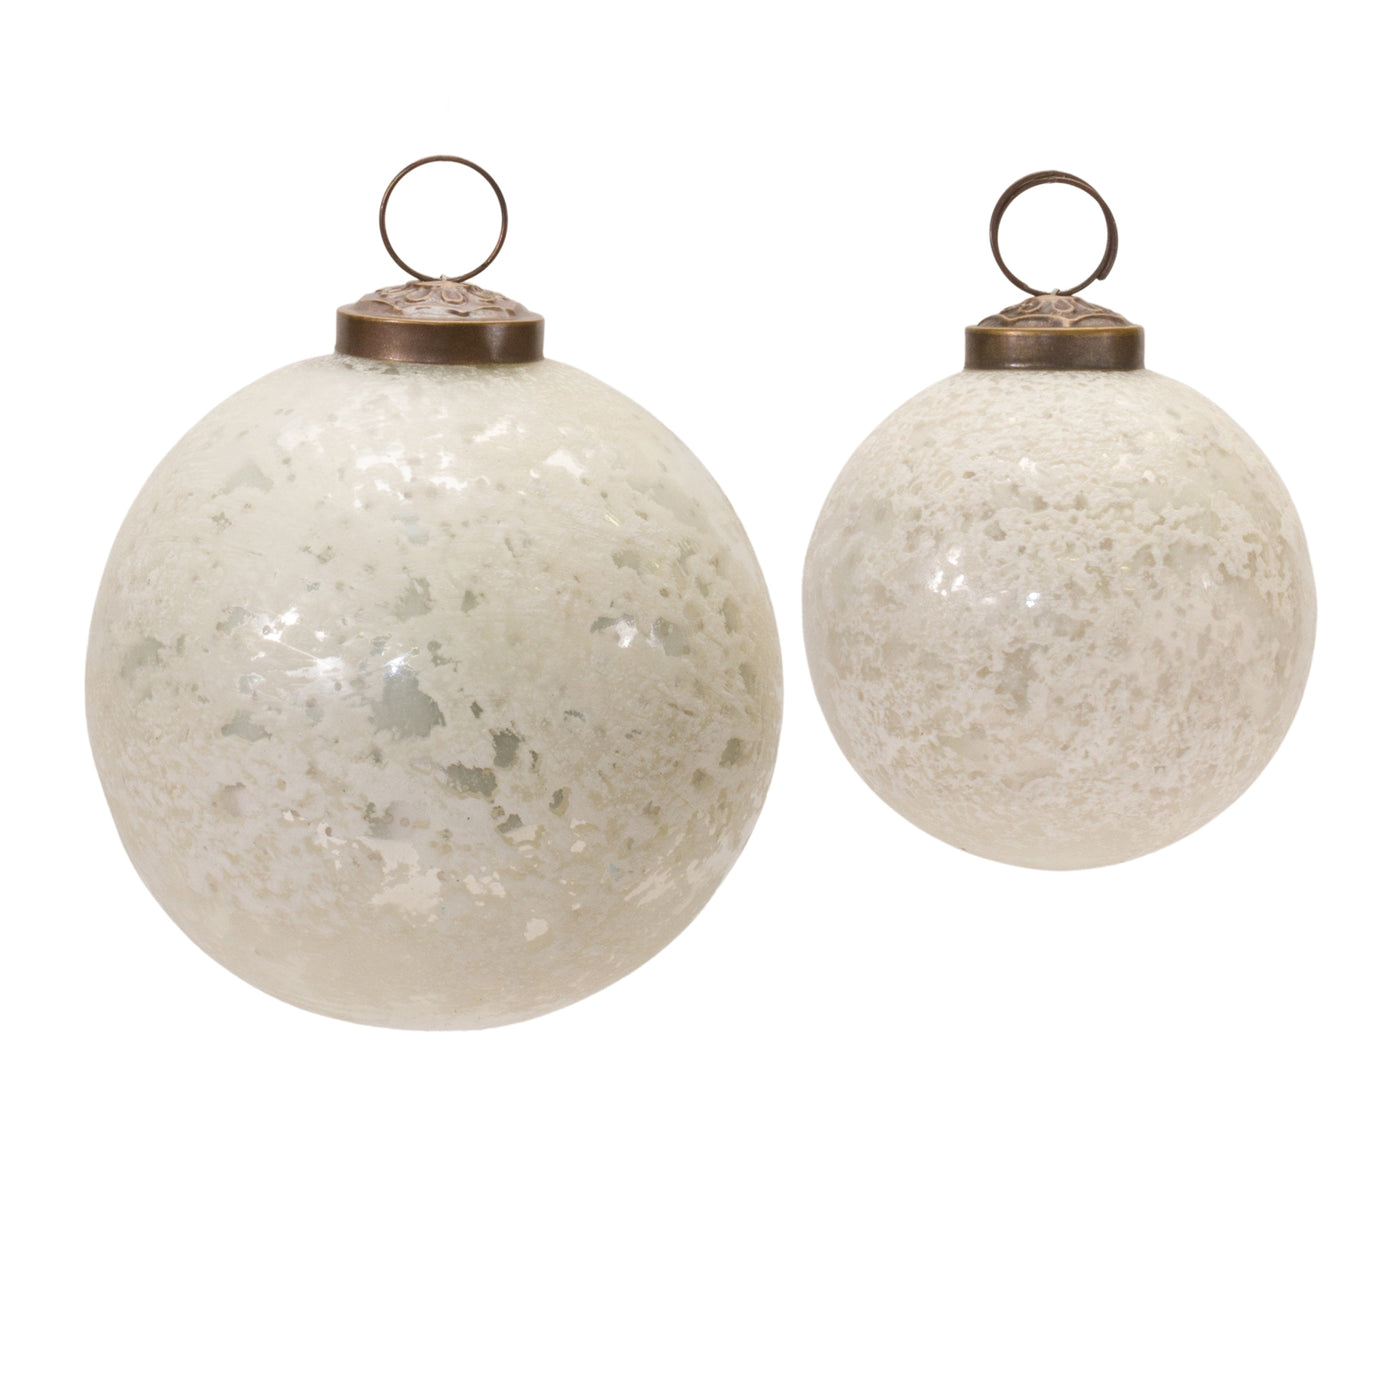 Cream Speckled Glass Ornaments